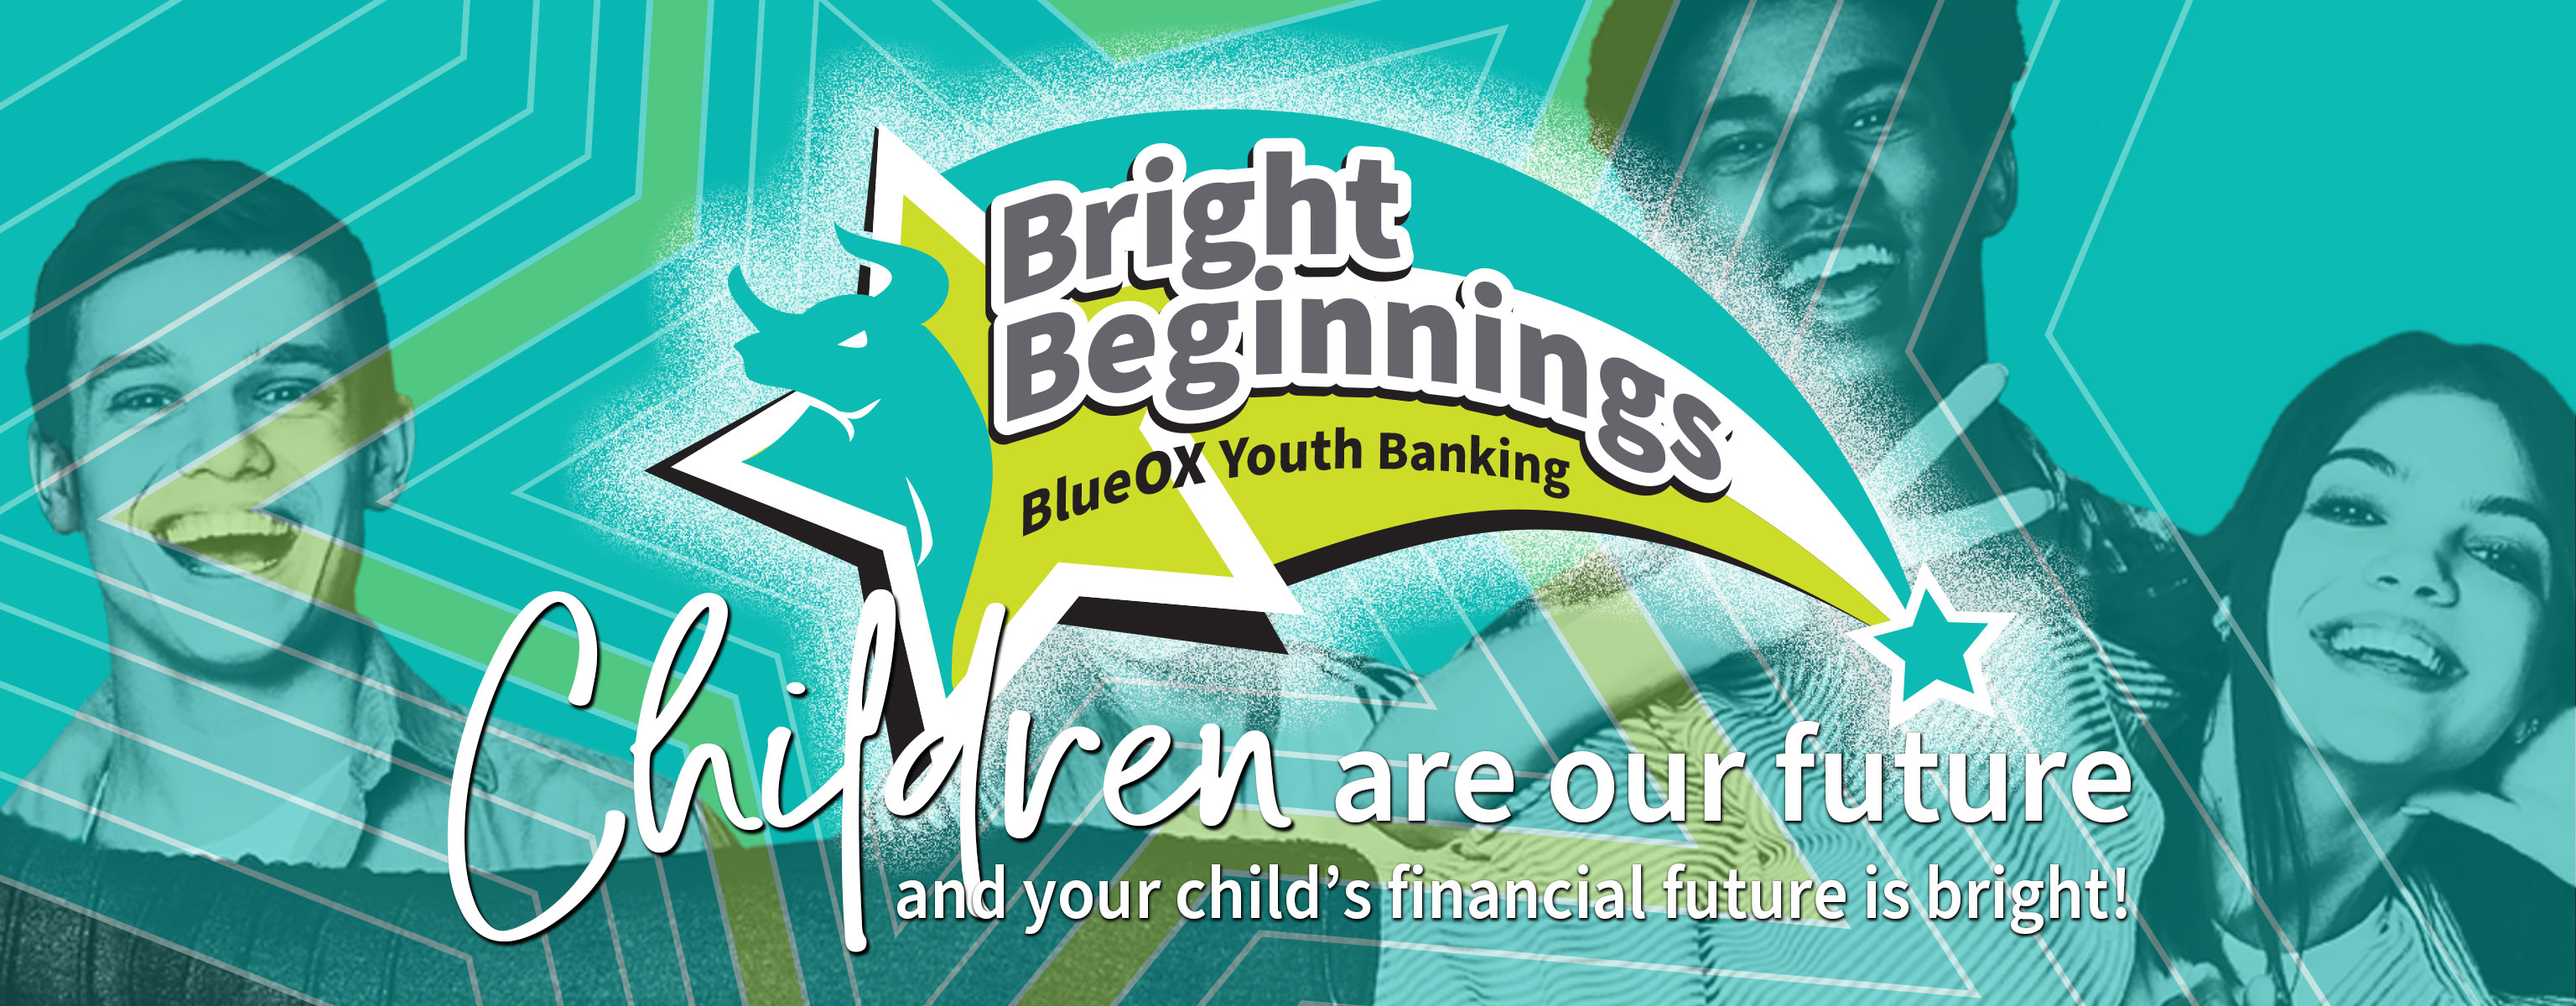 Bright Beginning Youth Banking. Your Child's financial future is bright!